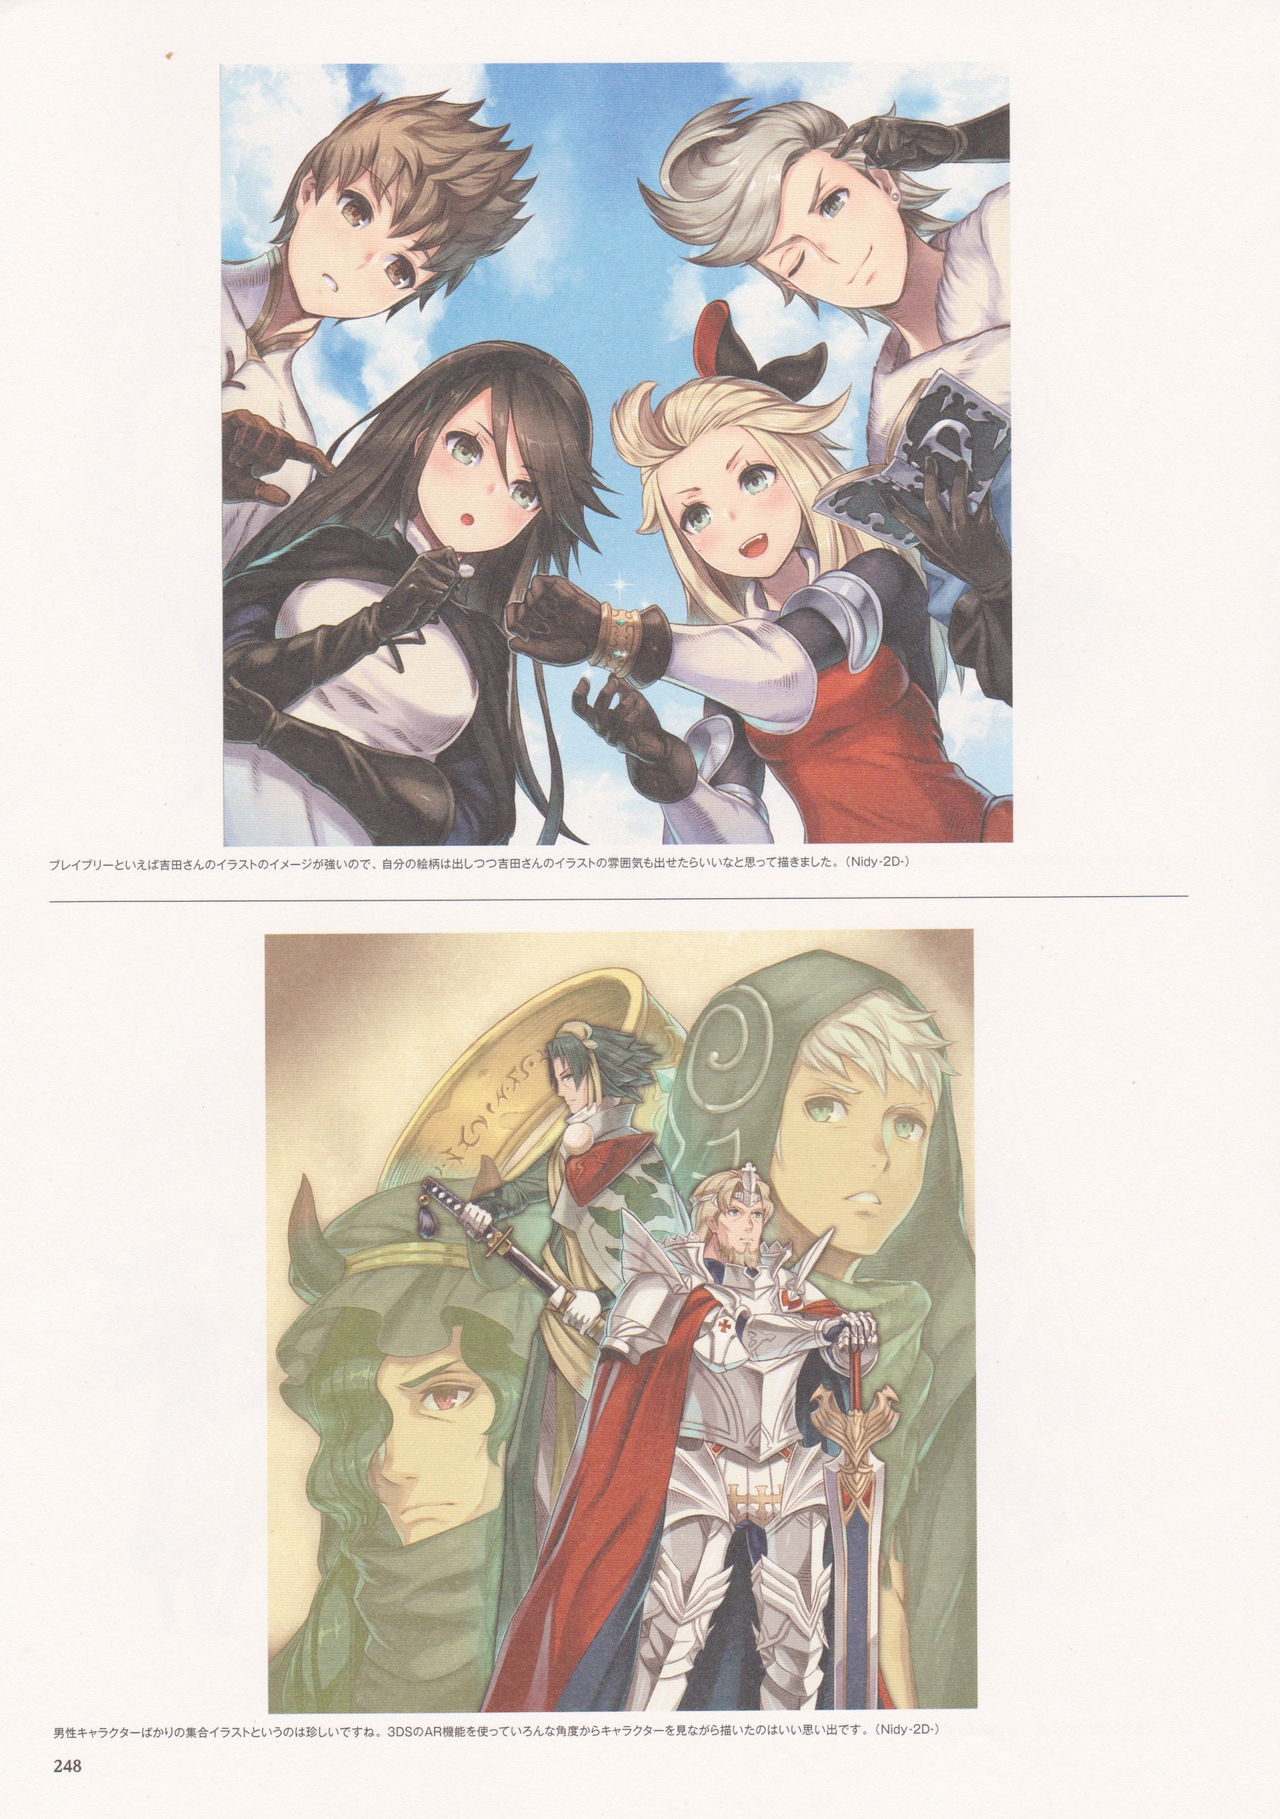 Bravely Second - End Layer - Design Works THE ART OF BRAVELY 2013-2015 247